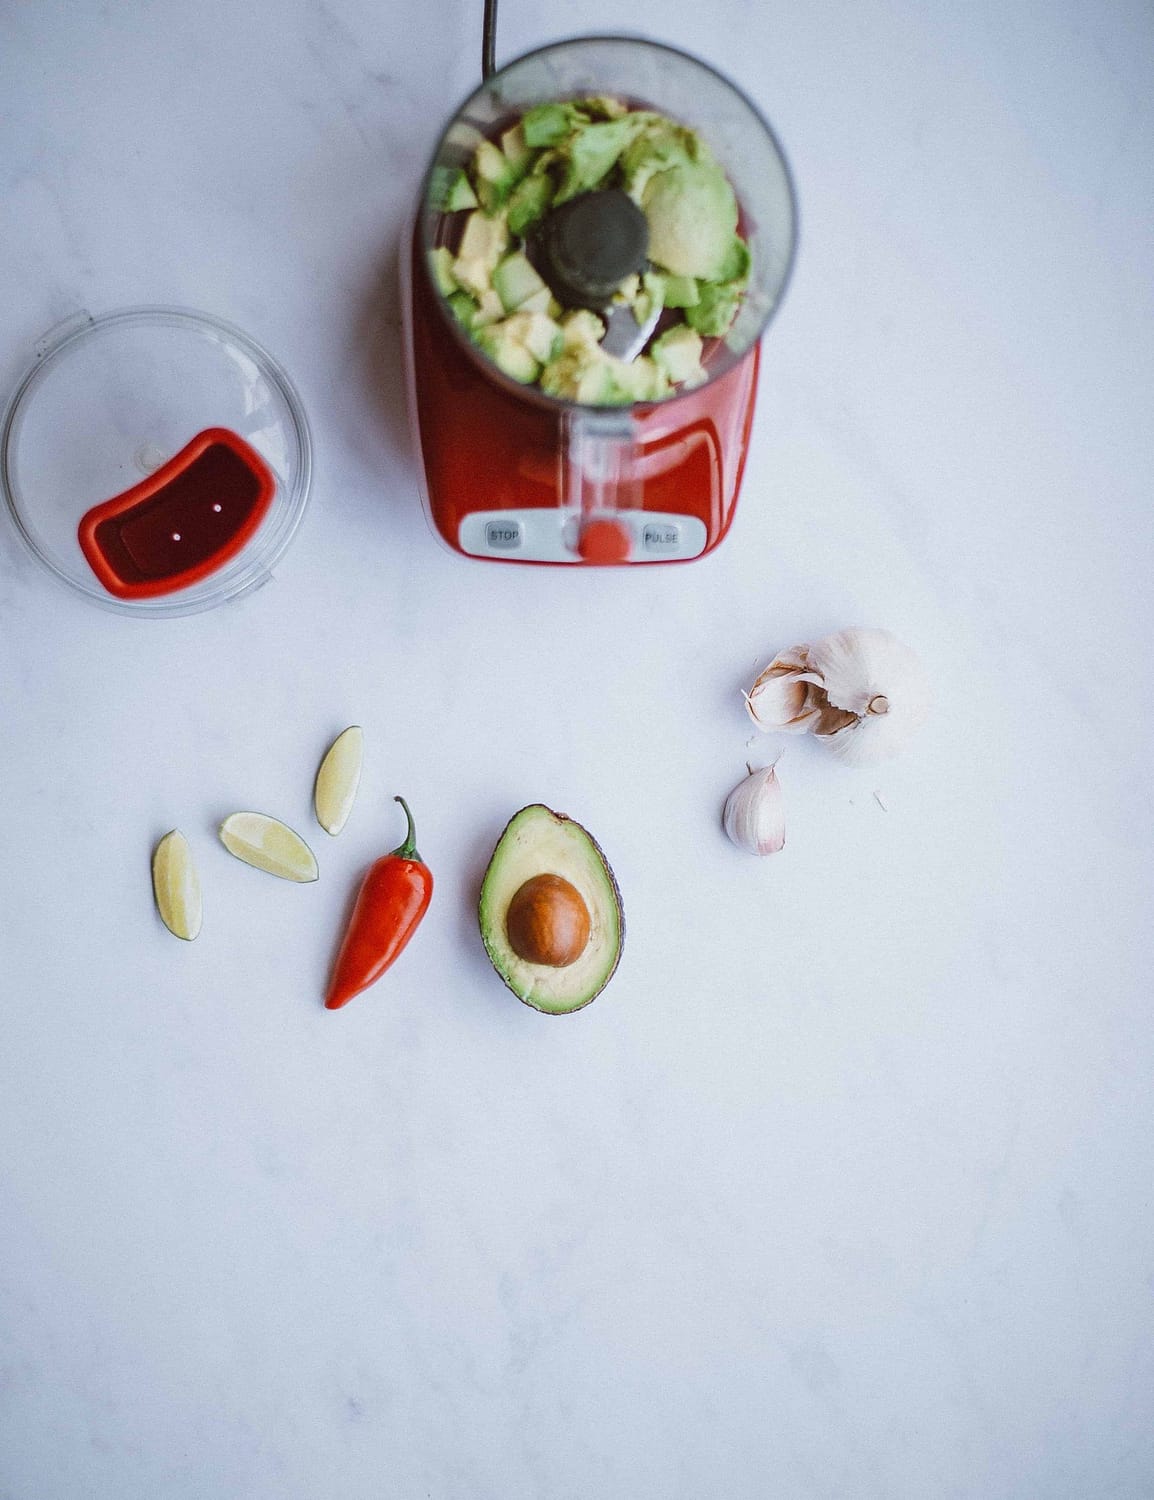 Red food processor next to avocado and peppers